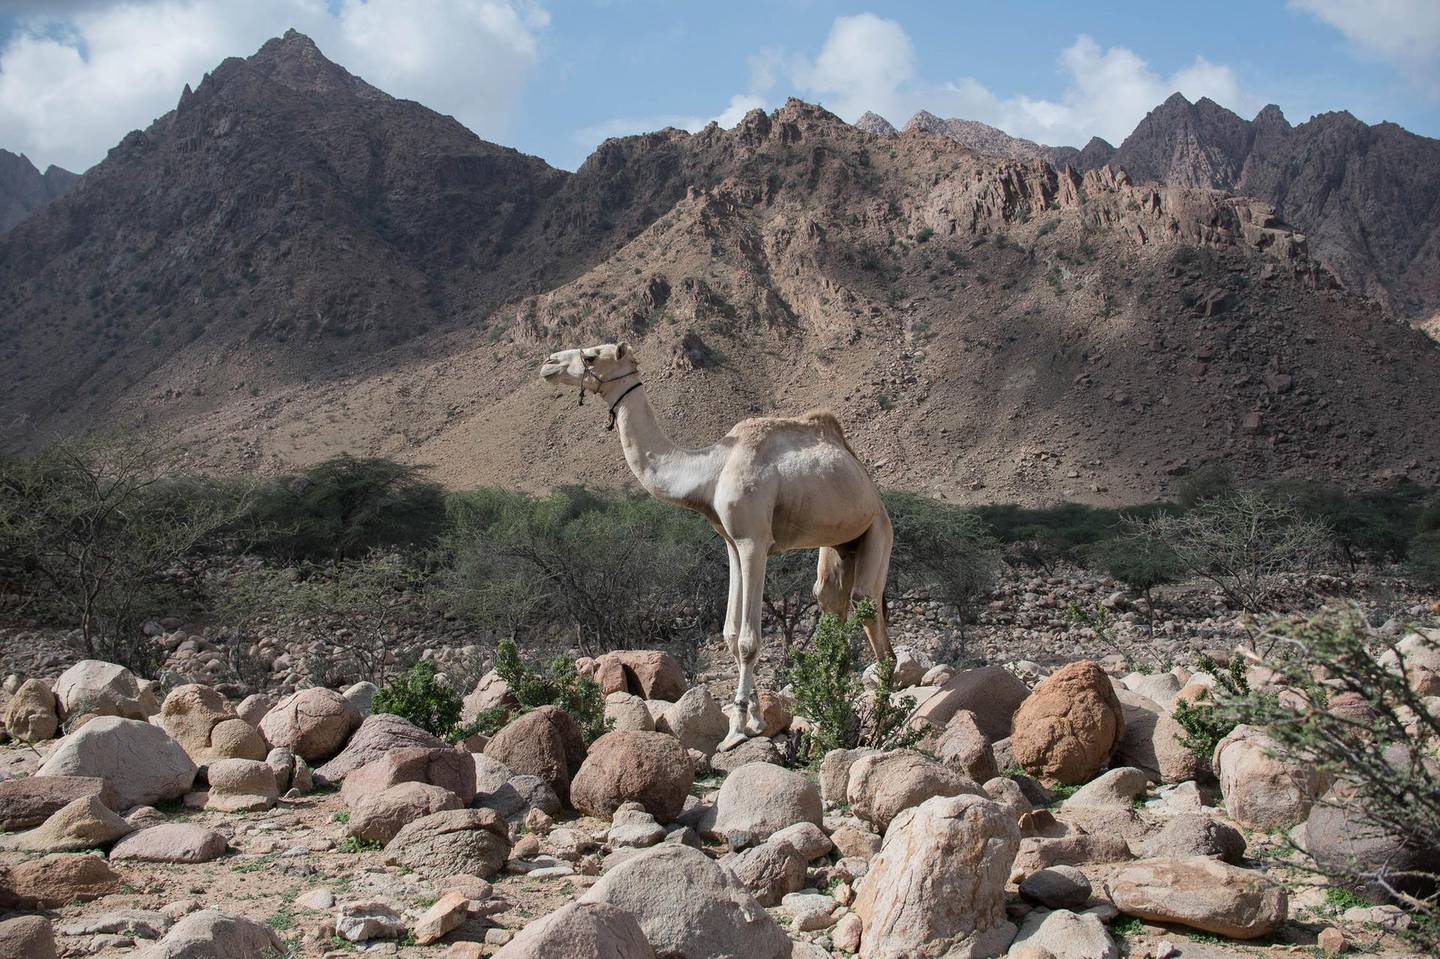 Camels can be seen strolling around throughout the protected area. A photo essay profiling the Gabal Elba Protected Area (GEPA) in Egypt's Red Sea governorate, along the borders with Sudan Photo by Jihad Abaza